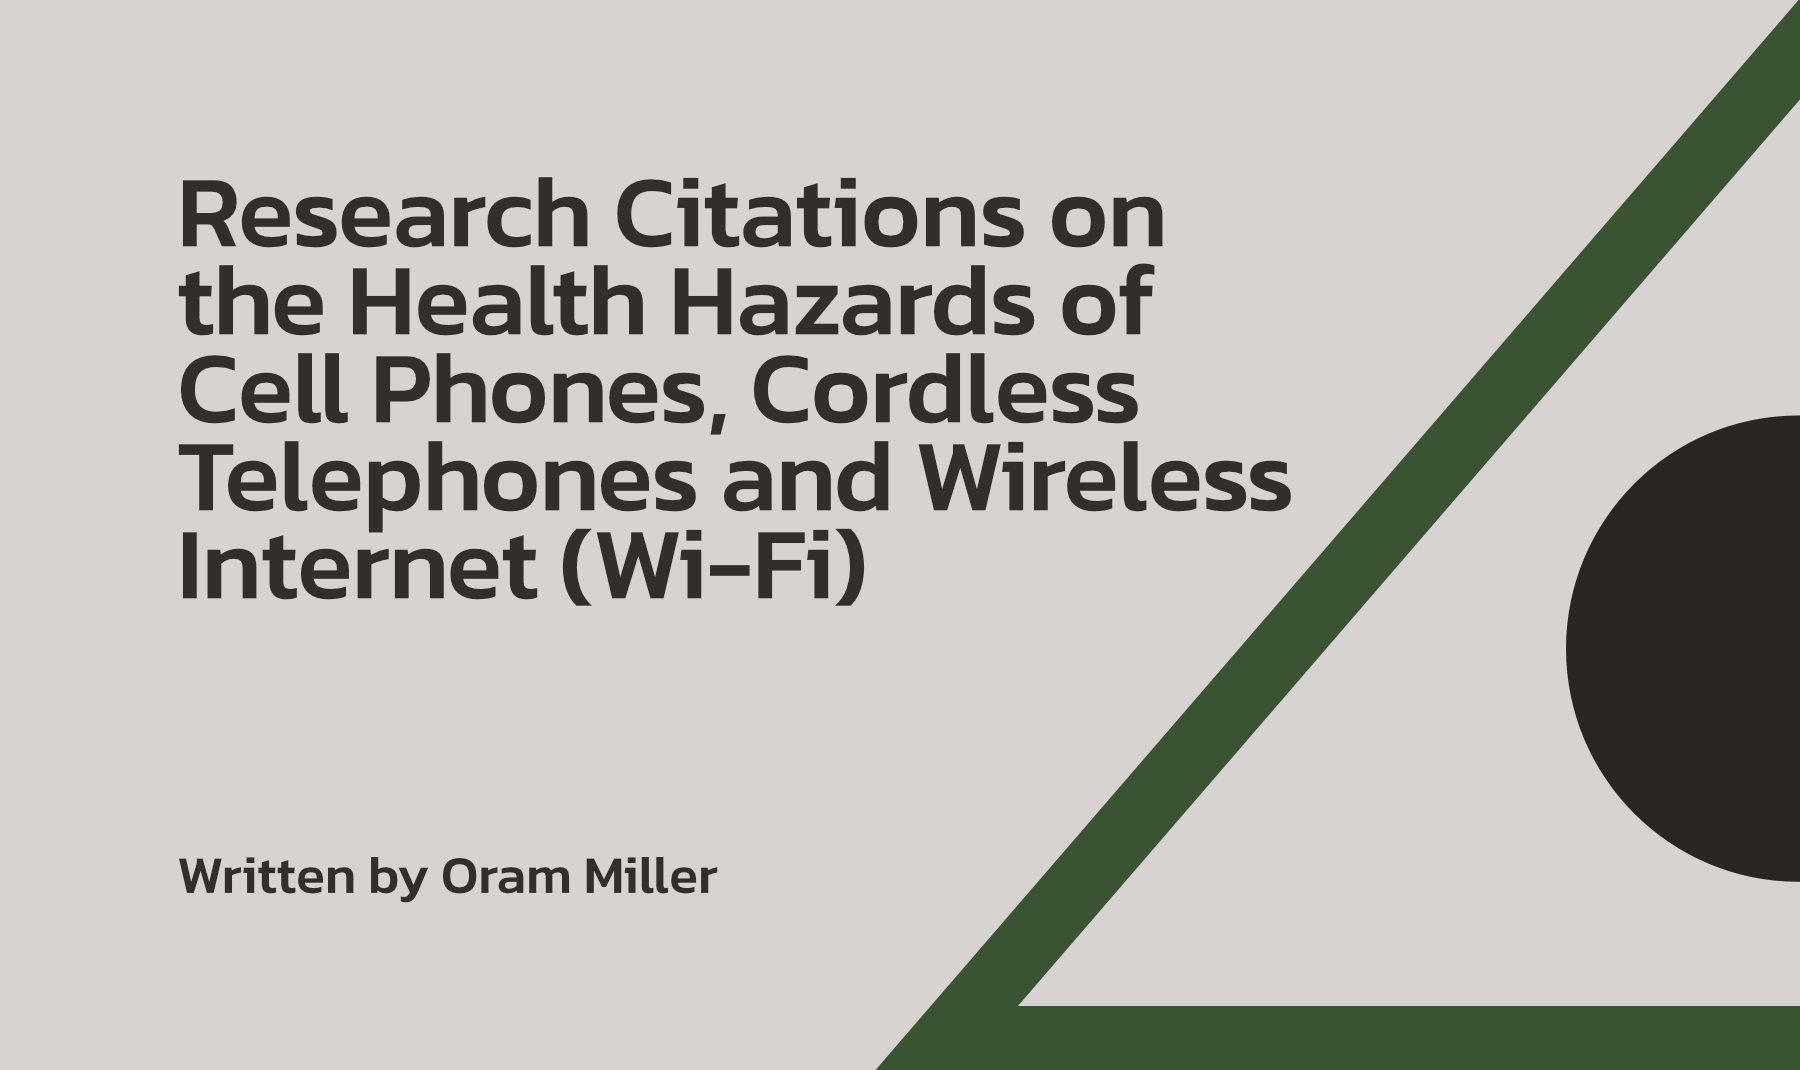 Research Citations on the Health Hazards of Cell Phones, Cordless Telephones and Wireless Internet (Wi-Fi)